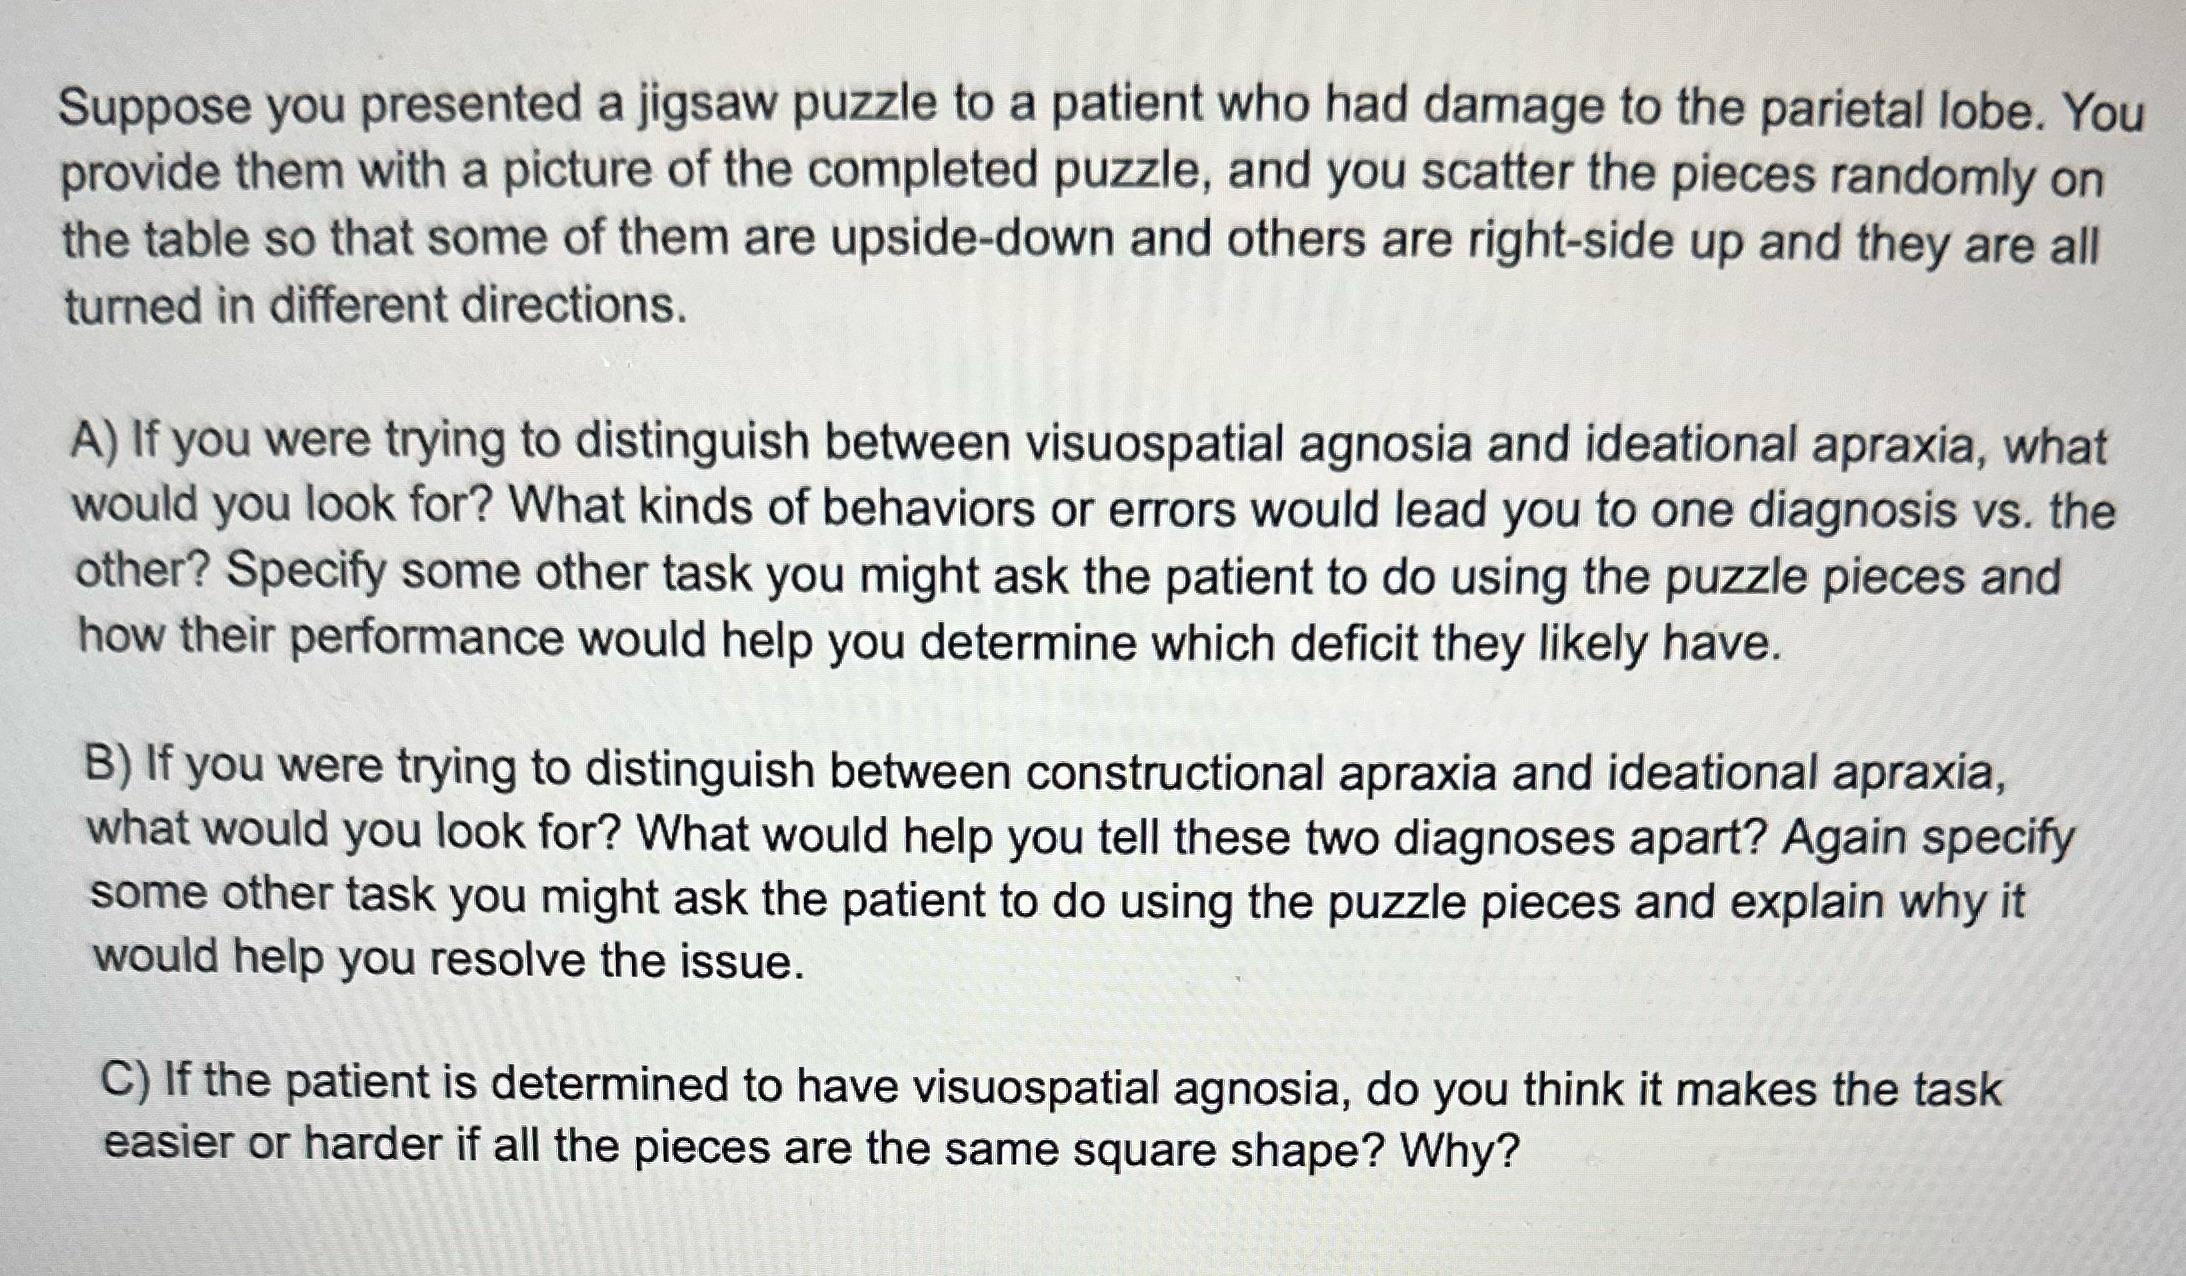 Suppose you presented a jigsaw puzzle to a patient who had damage to the parietal lobe. You provide them with